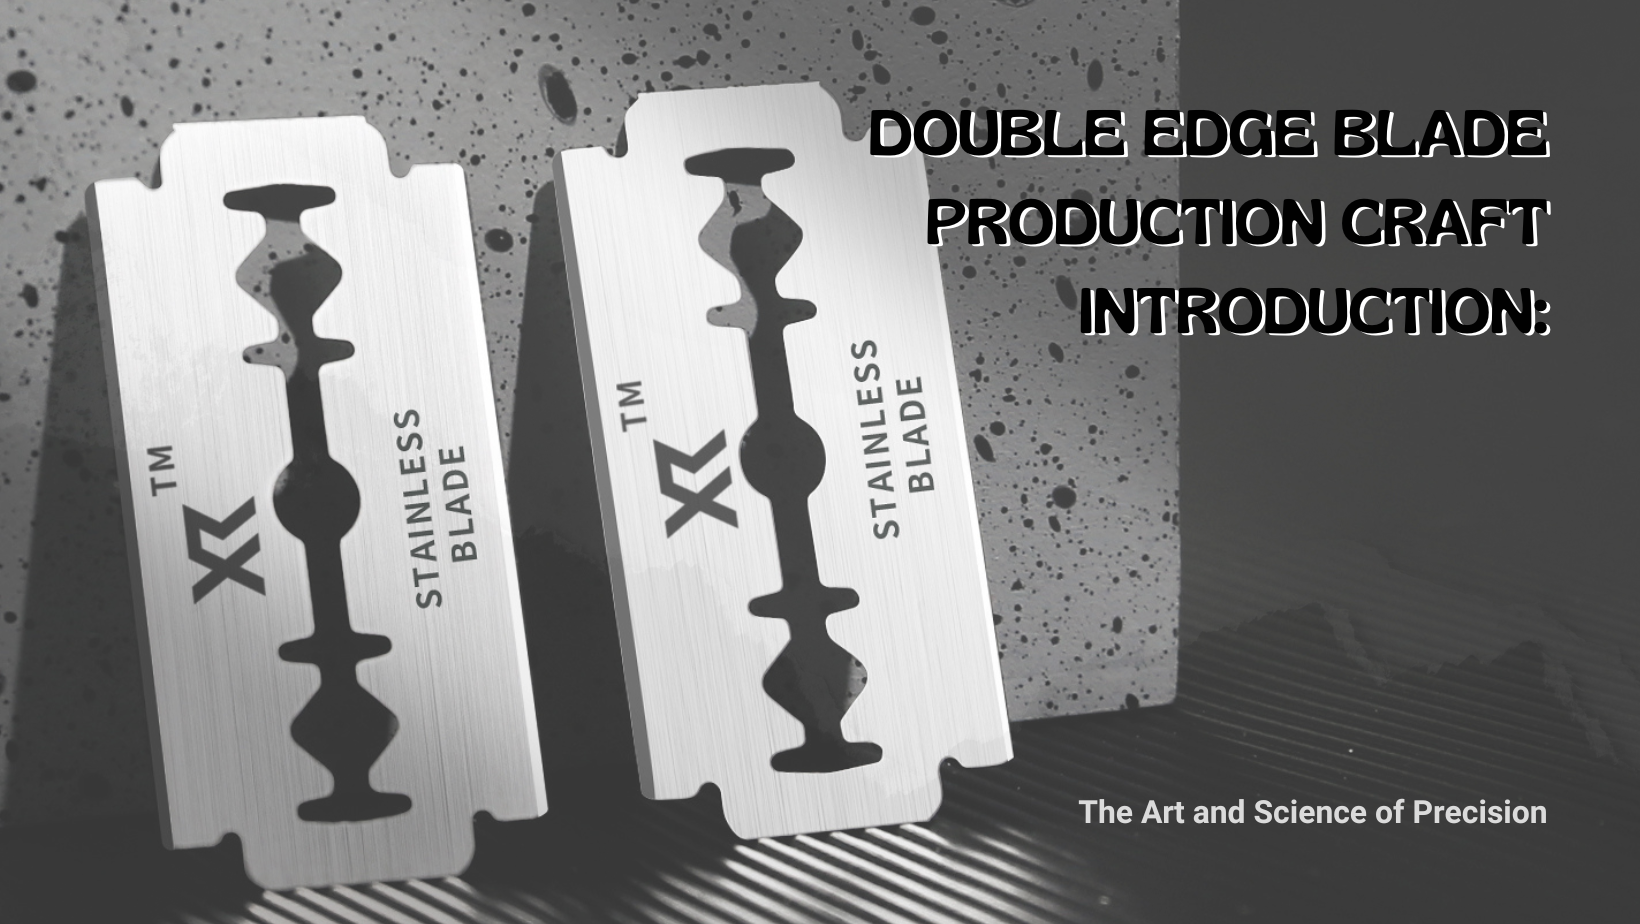 Double Edge Blade Production Craft Introduction: The Art and Science of Precision